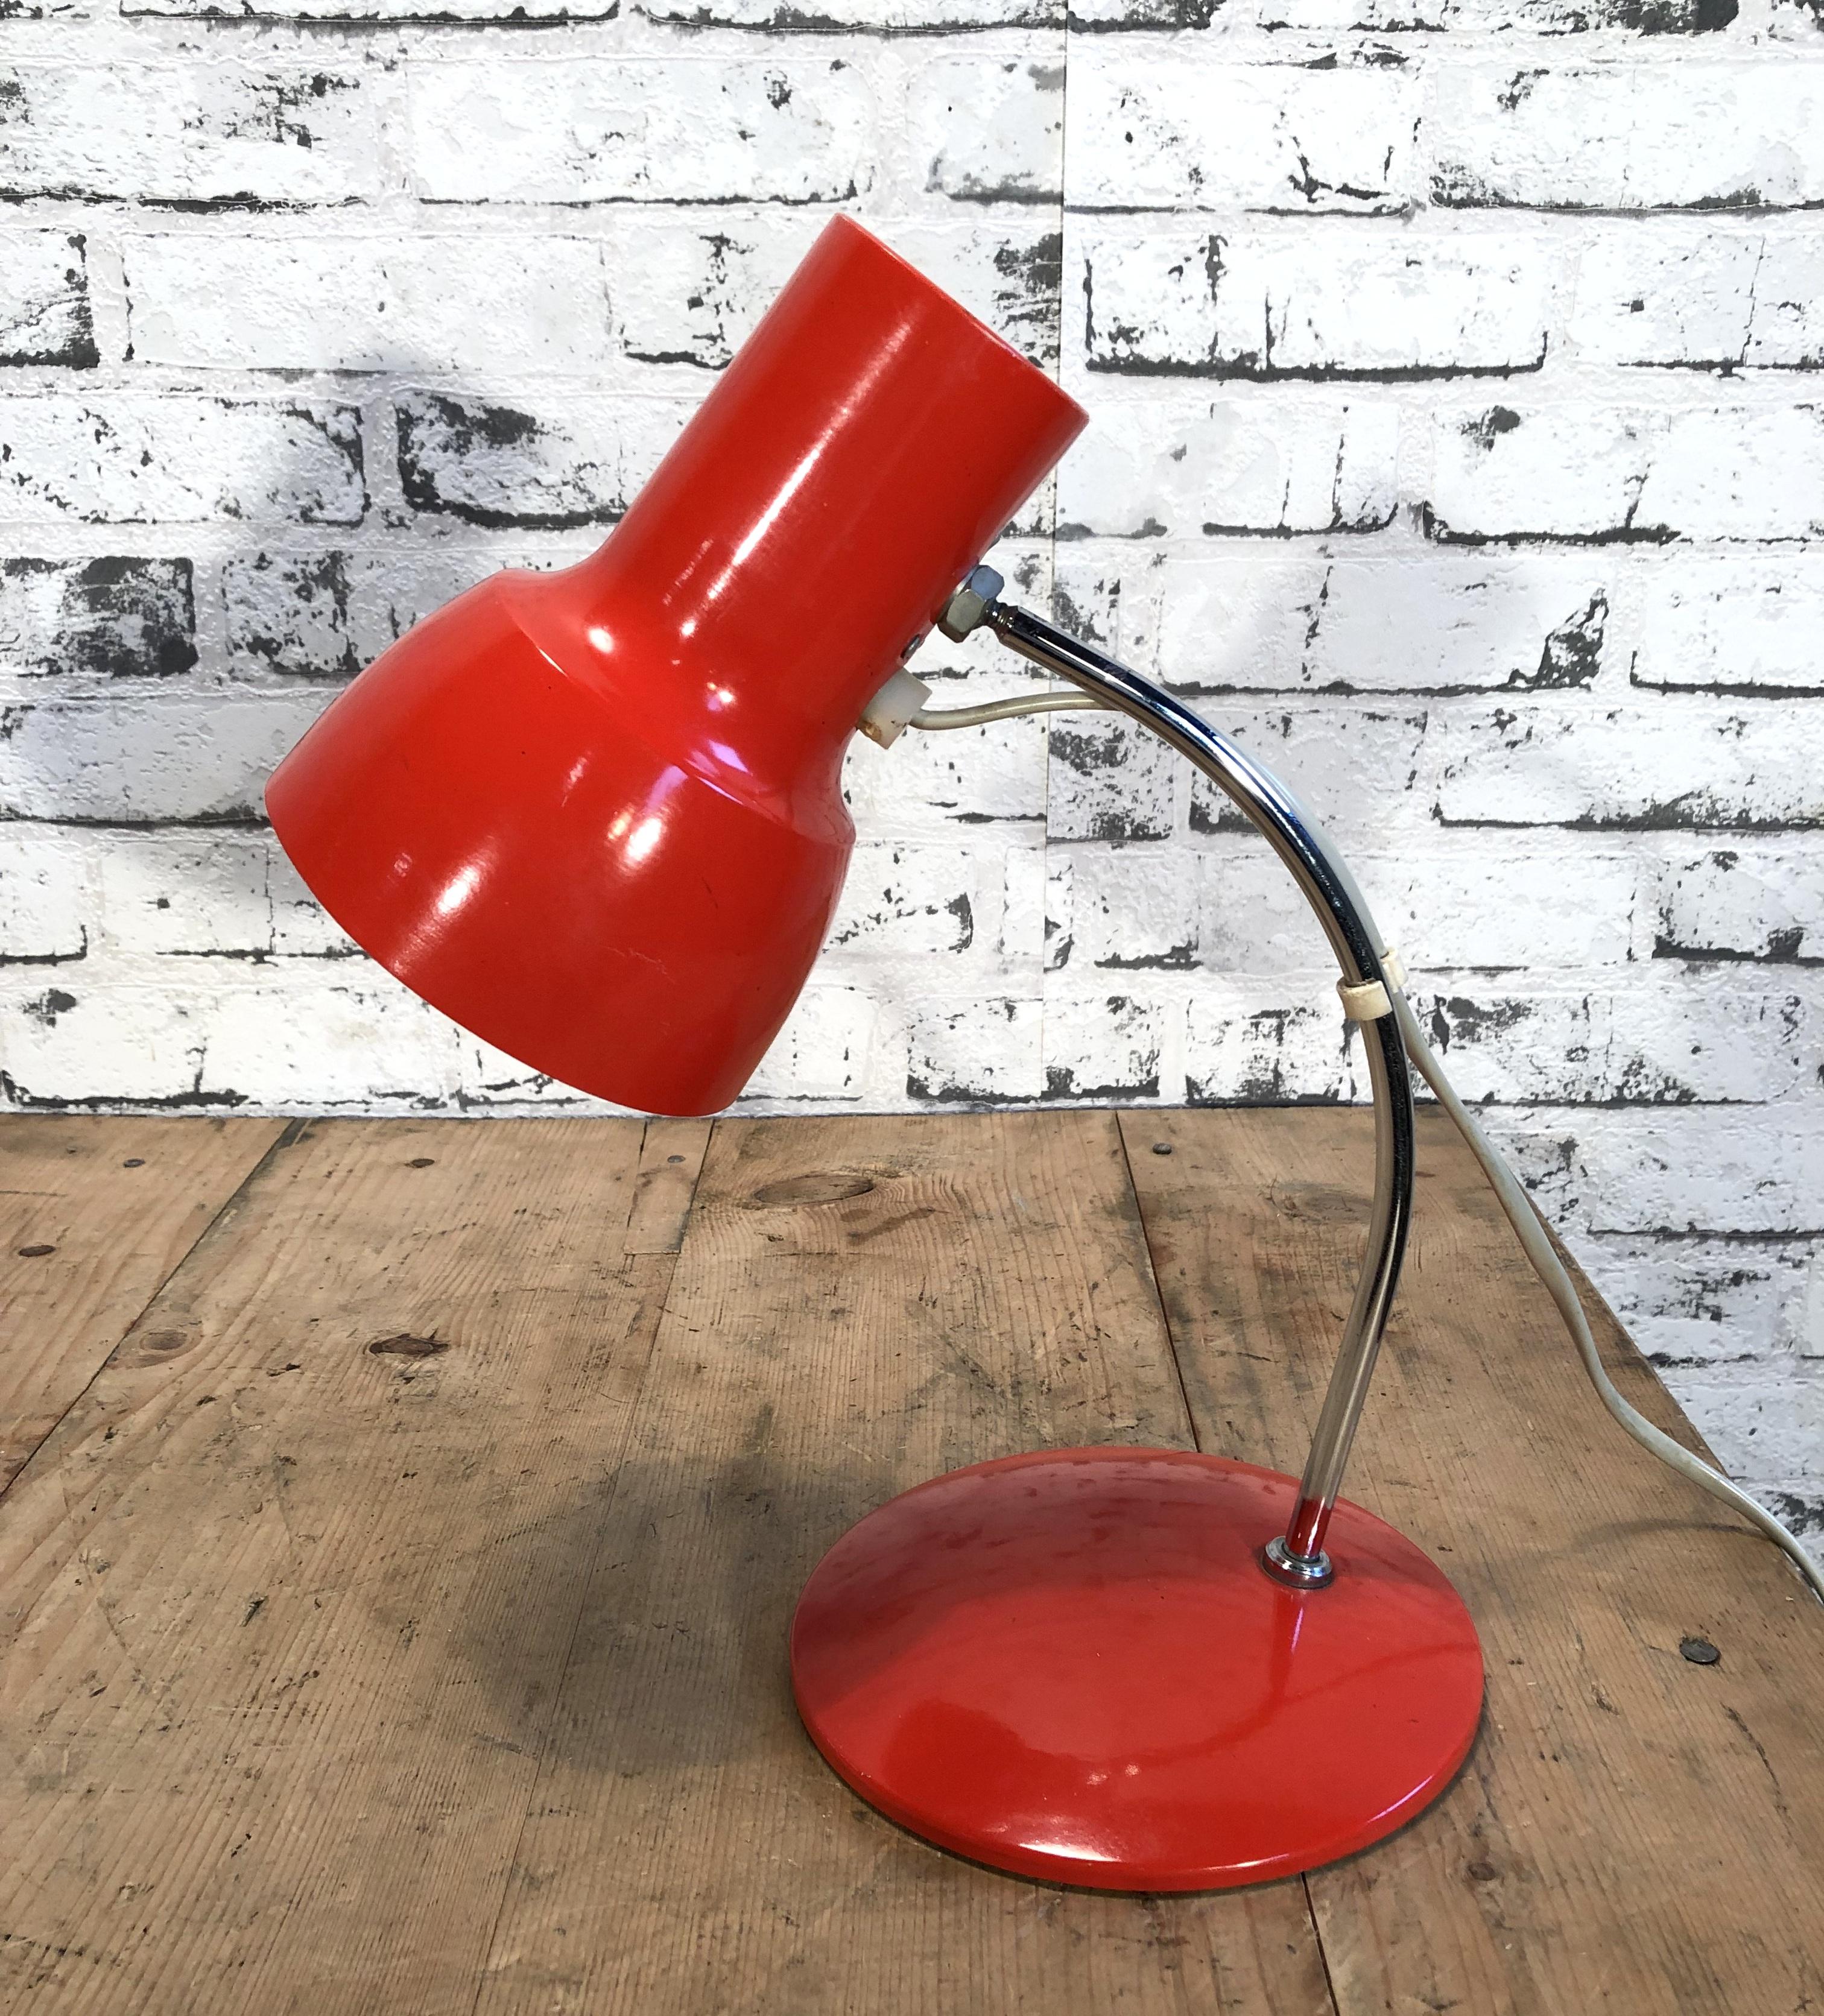 This small red table lamp was designed by Josef Hurka and produced by Napako in former Czechoslovakia during the 1960s. The lamp has a steel body and aluminum lampshade. Fully functional. Good vintage condition. Socket for E 14 ligt bulbs. Measures: